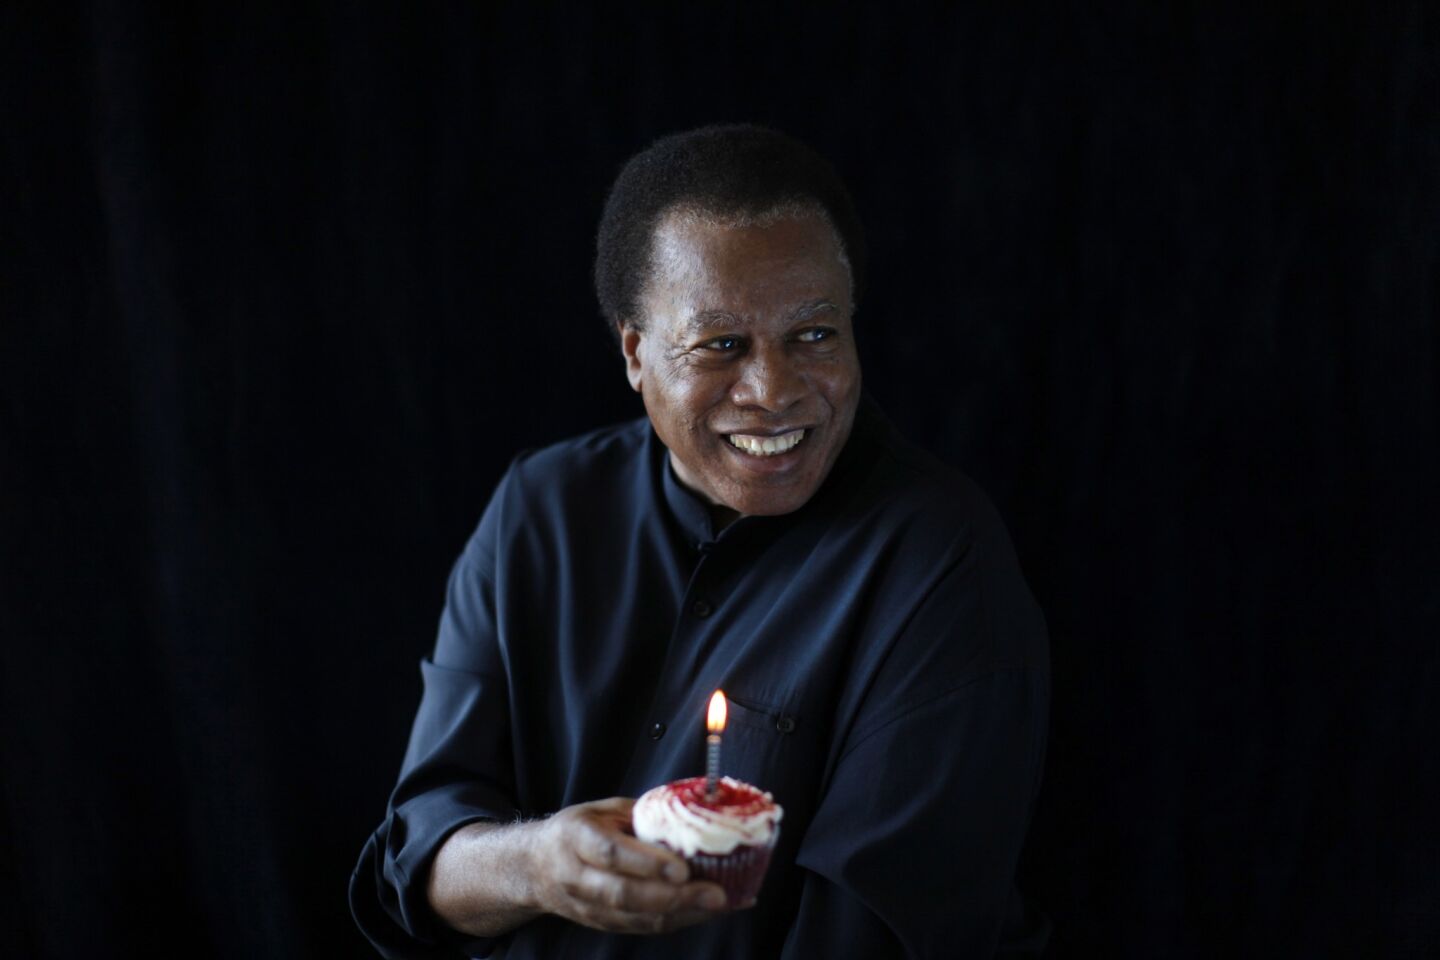 Saxophonist and composer Wayne Shorter will celebrate his 80th birthday with a Hollywood Bowl concert Aug. 28.